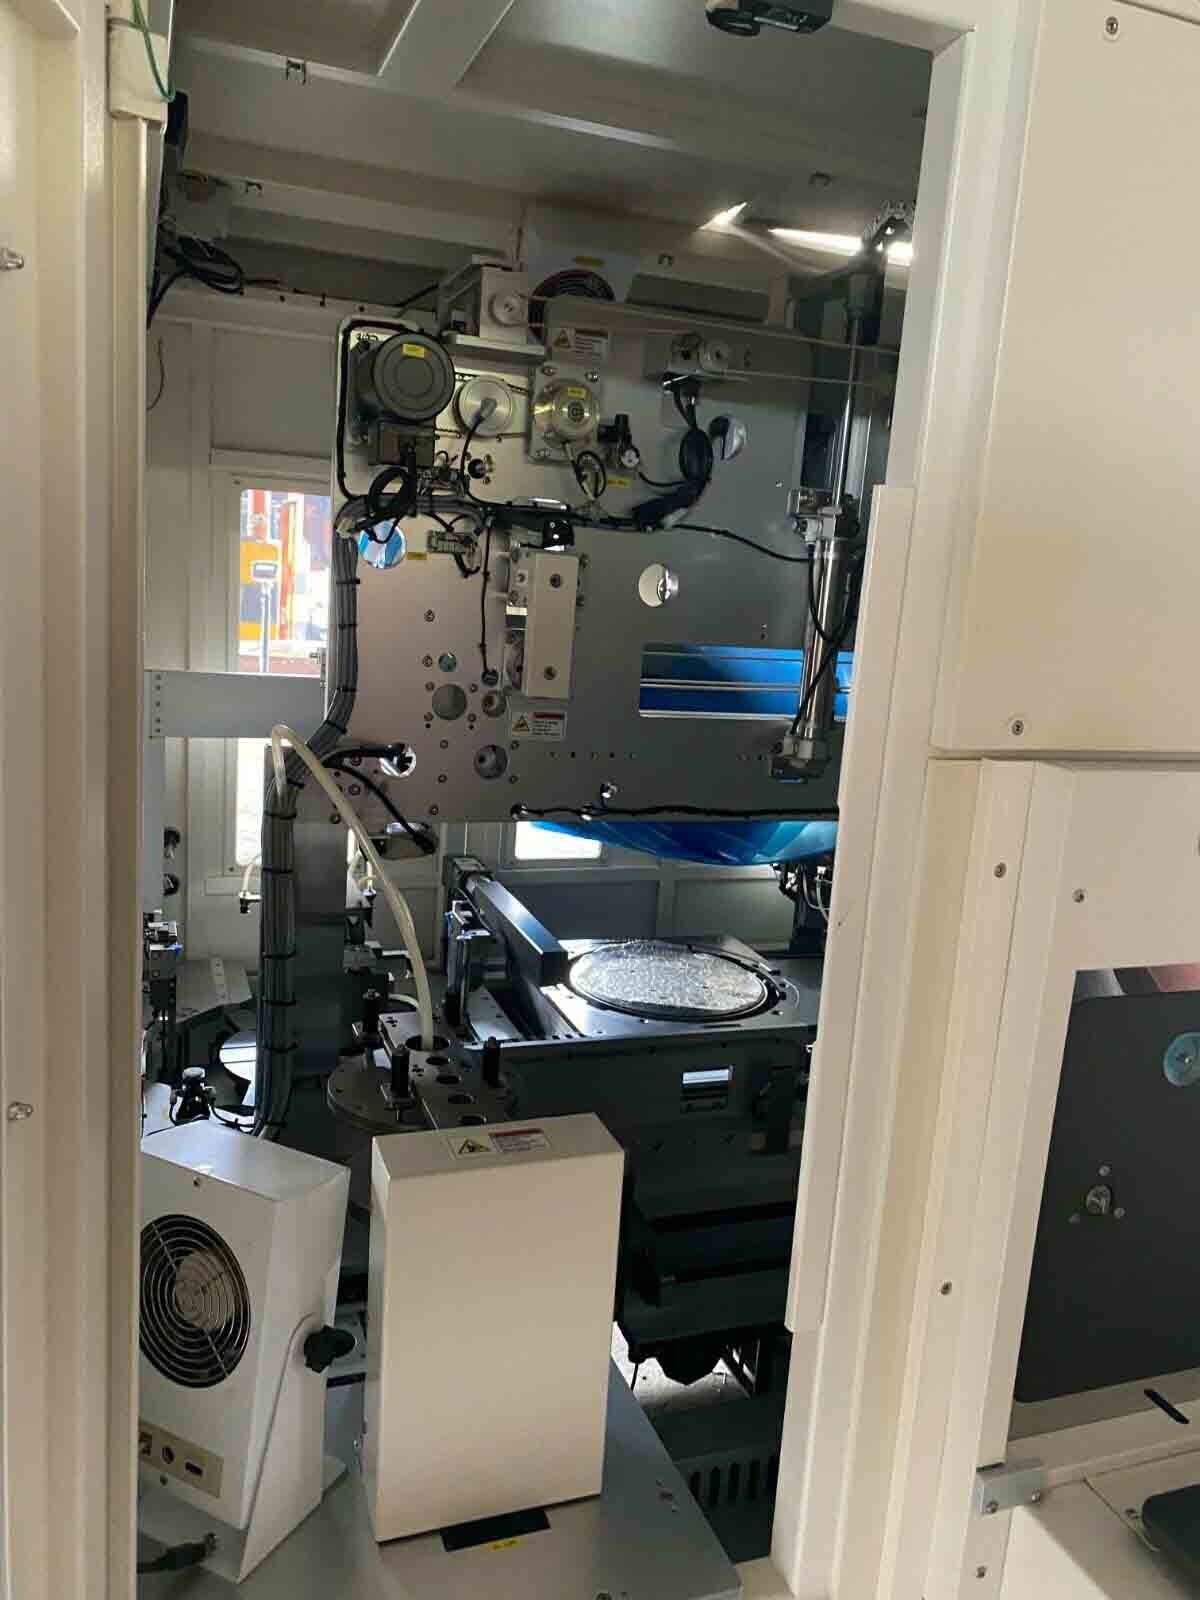 Photo Used DYNATECH DT-SWM1500-EWLB For Sale